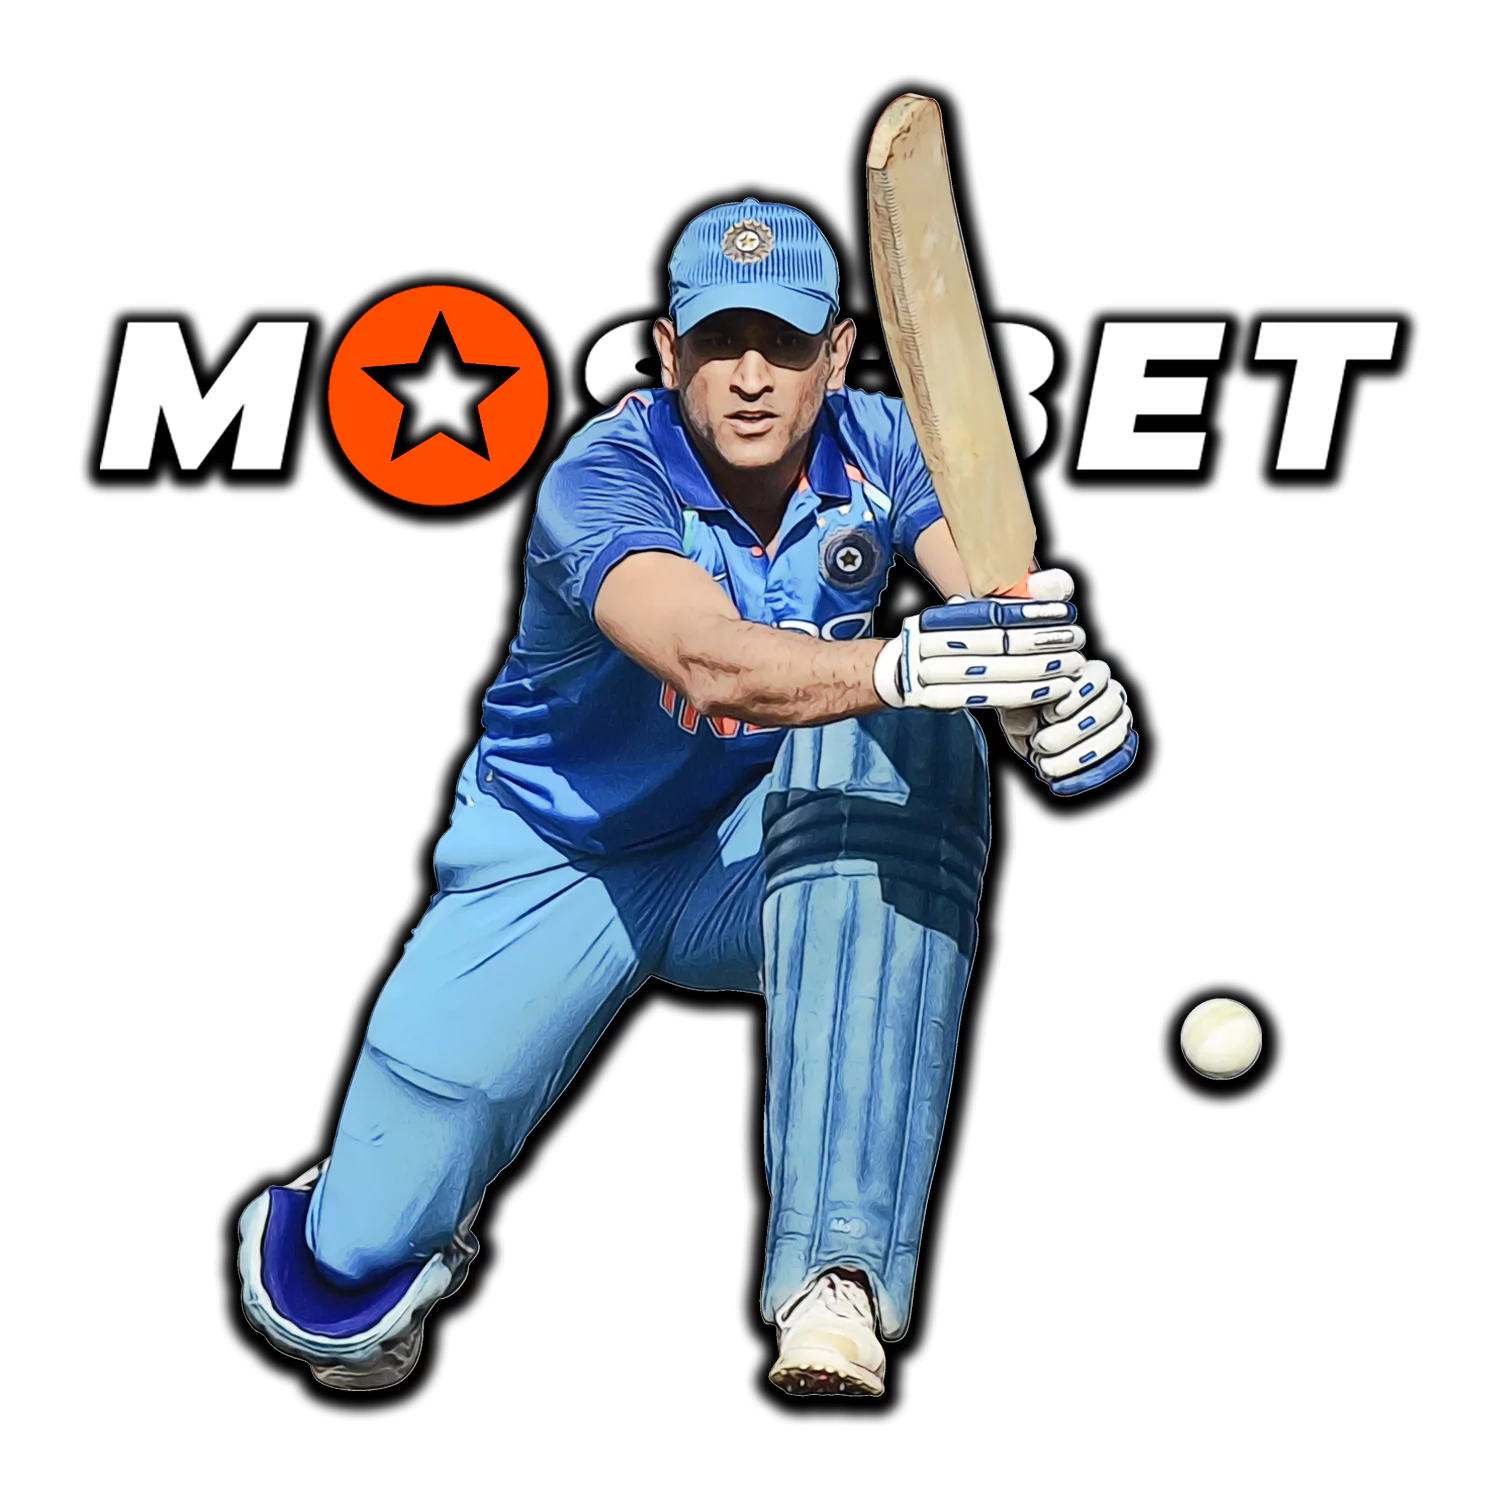 Find out about all the advantages of cricket betting at Mostbet.